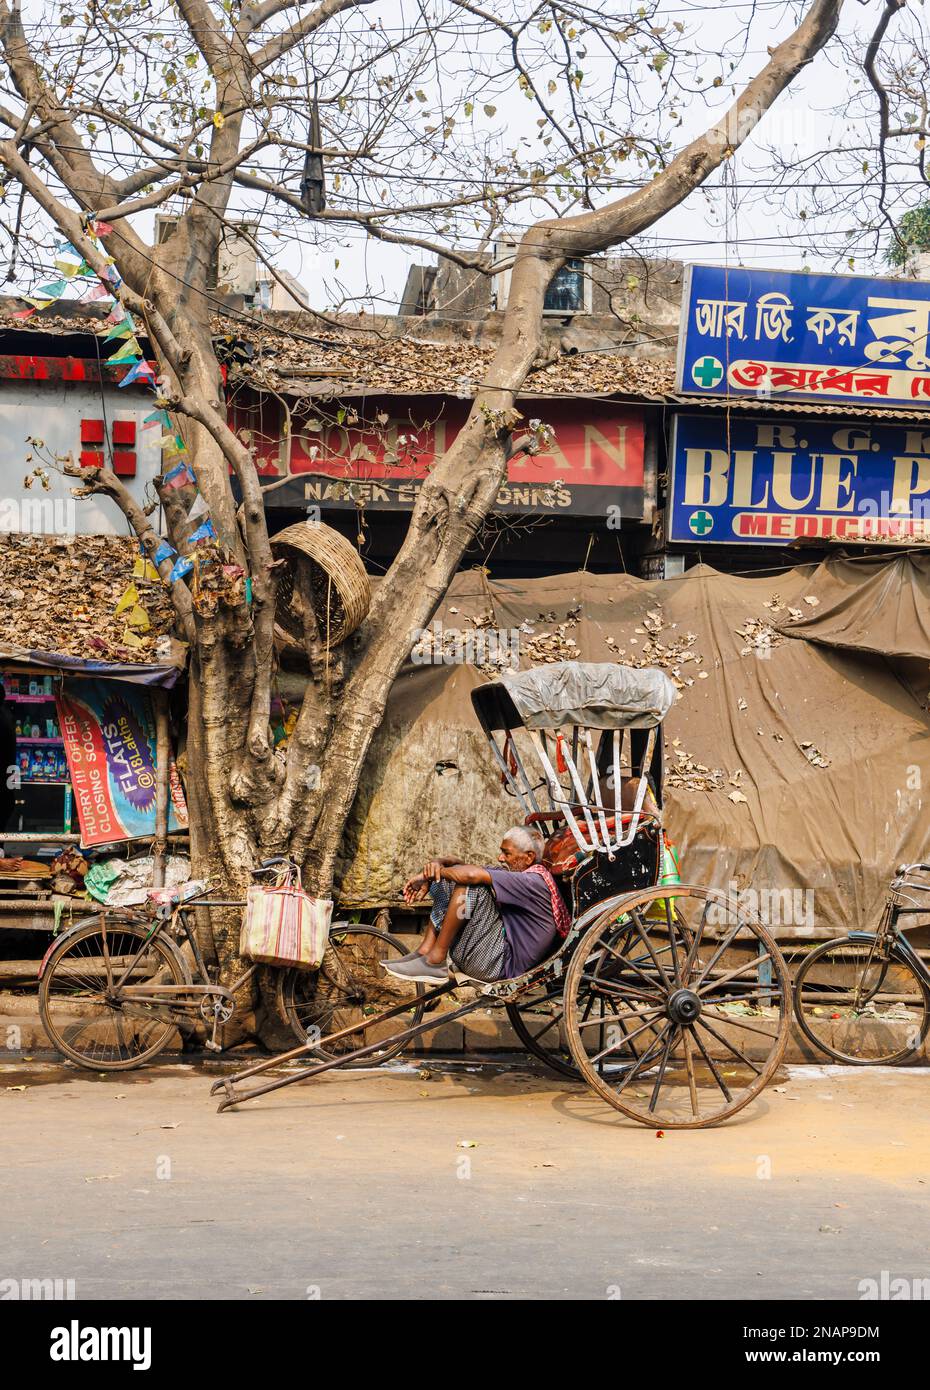 Street scene of a resting rickshaw driver, local people, shops, stalls and kiosks in Fariapukur, Shyam Bazar, a suburb of Kolkata, West Bengal, India Stock Photo